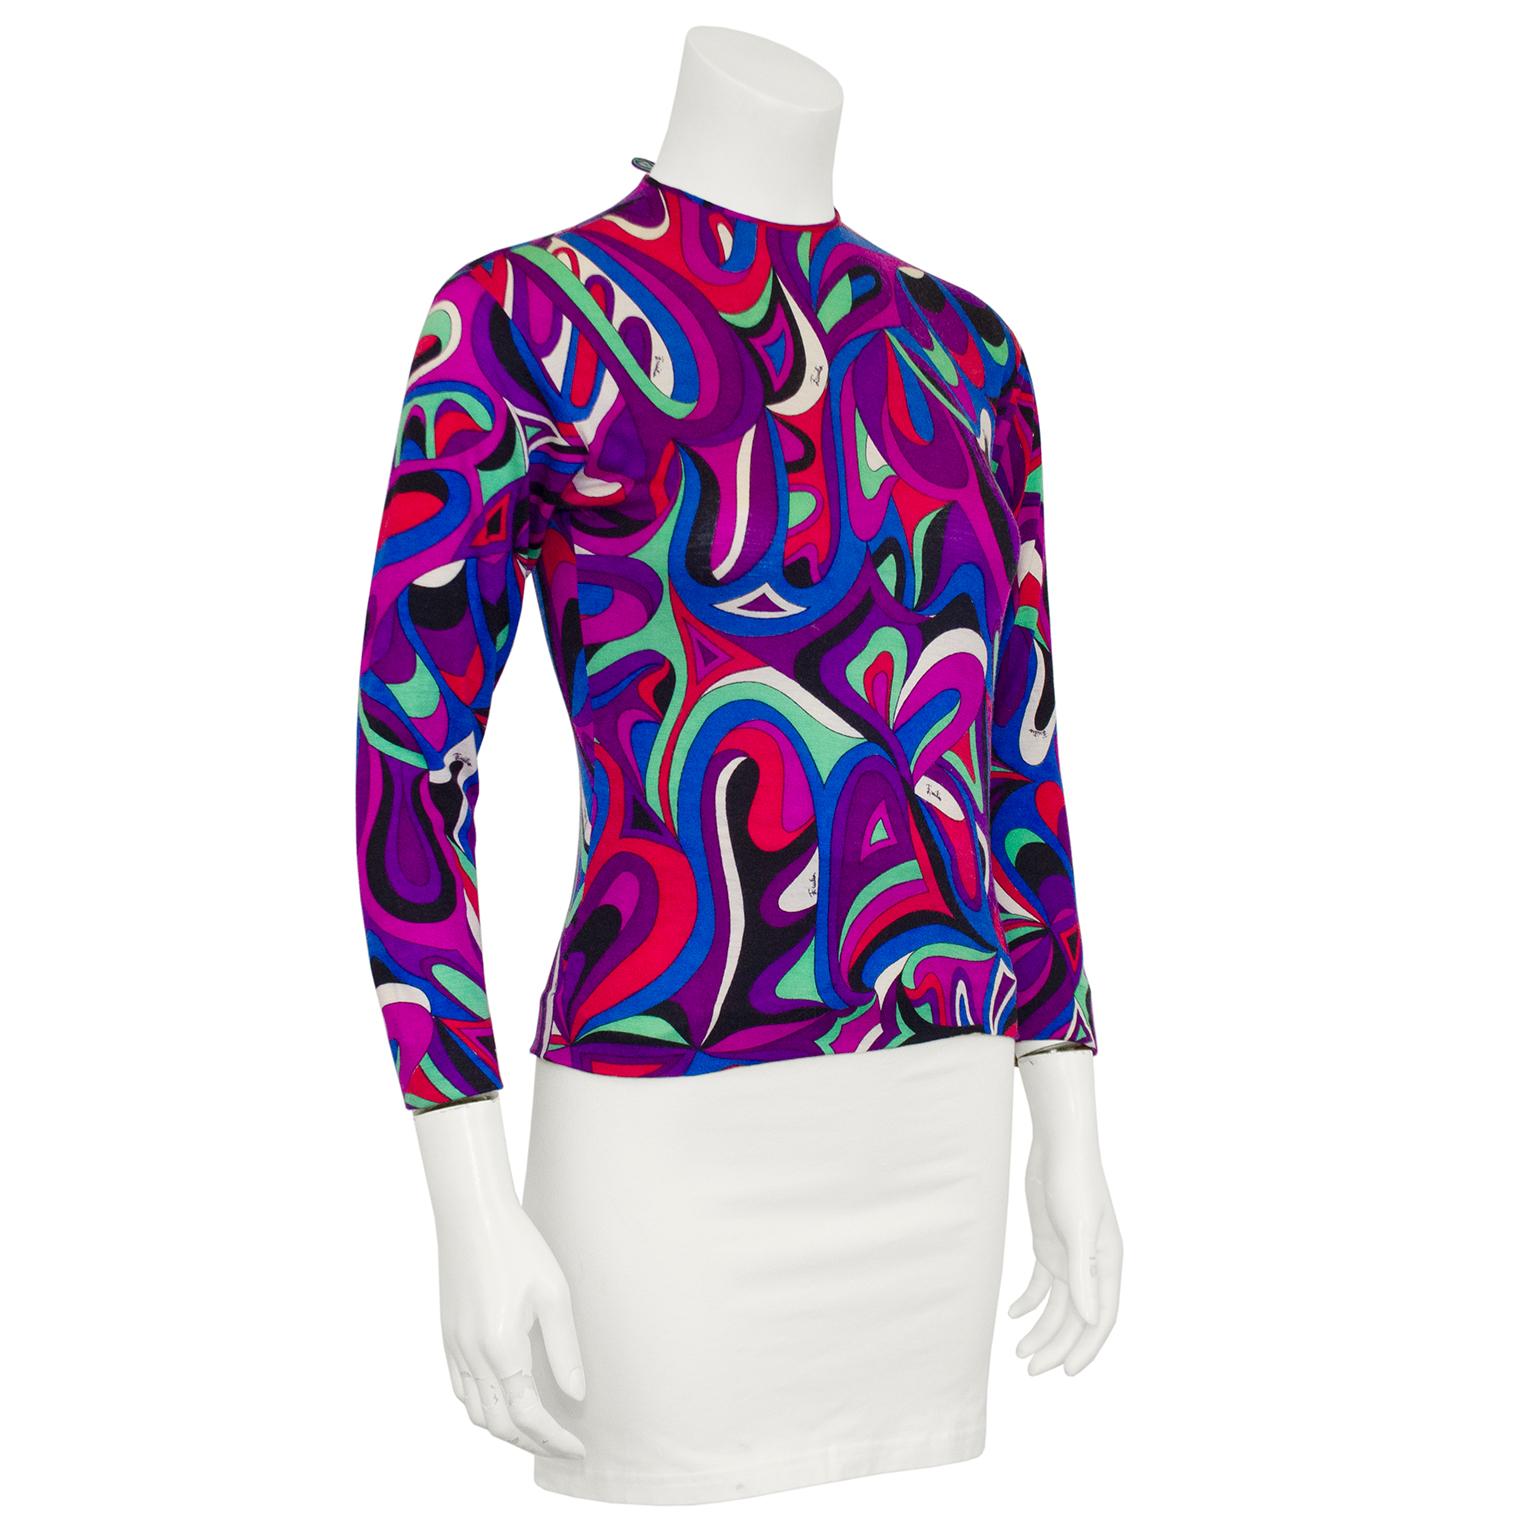 Beautiful Emilio Pucci very light weight pull over sweater from the 1970s. Made from 100% wool, this sweater features the iconic Emilio Pucci brand abstract print in tones of dark purples, blues, red, pink and mint green. Crew neckline and bracelet